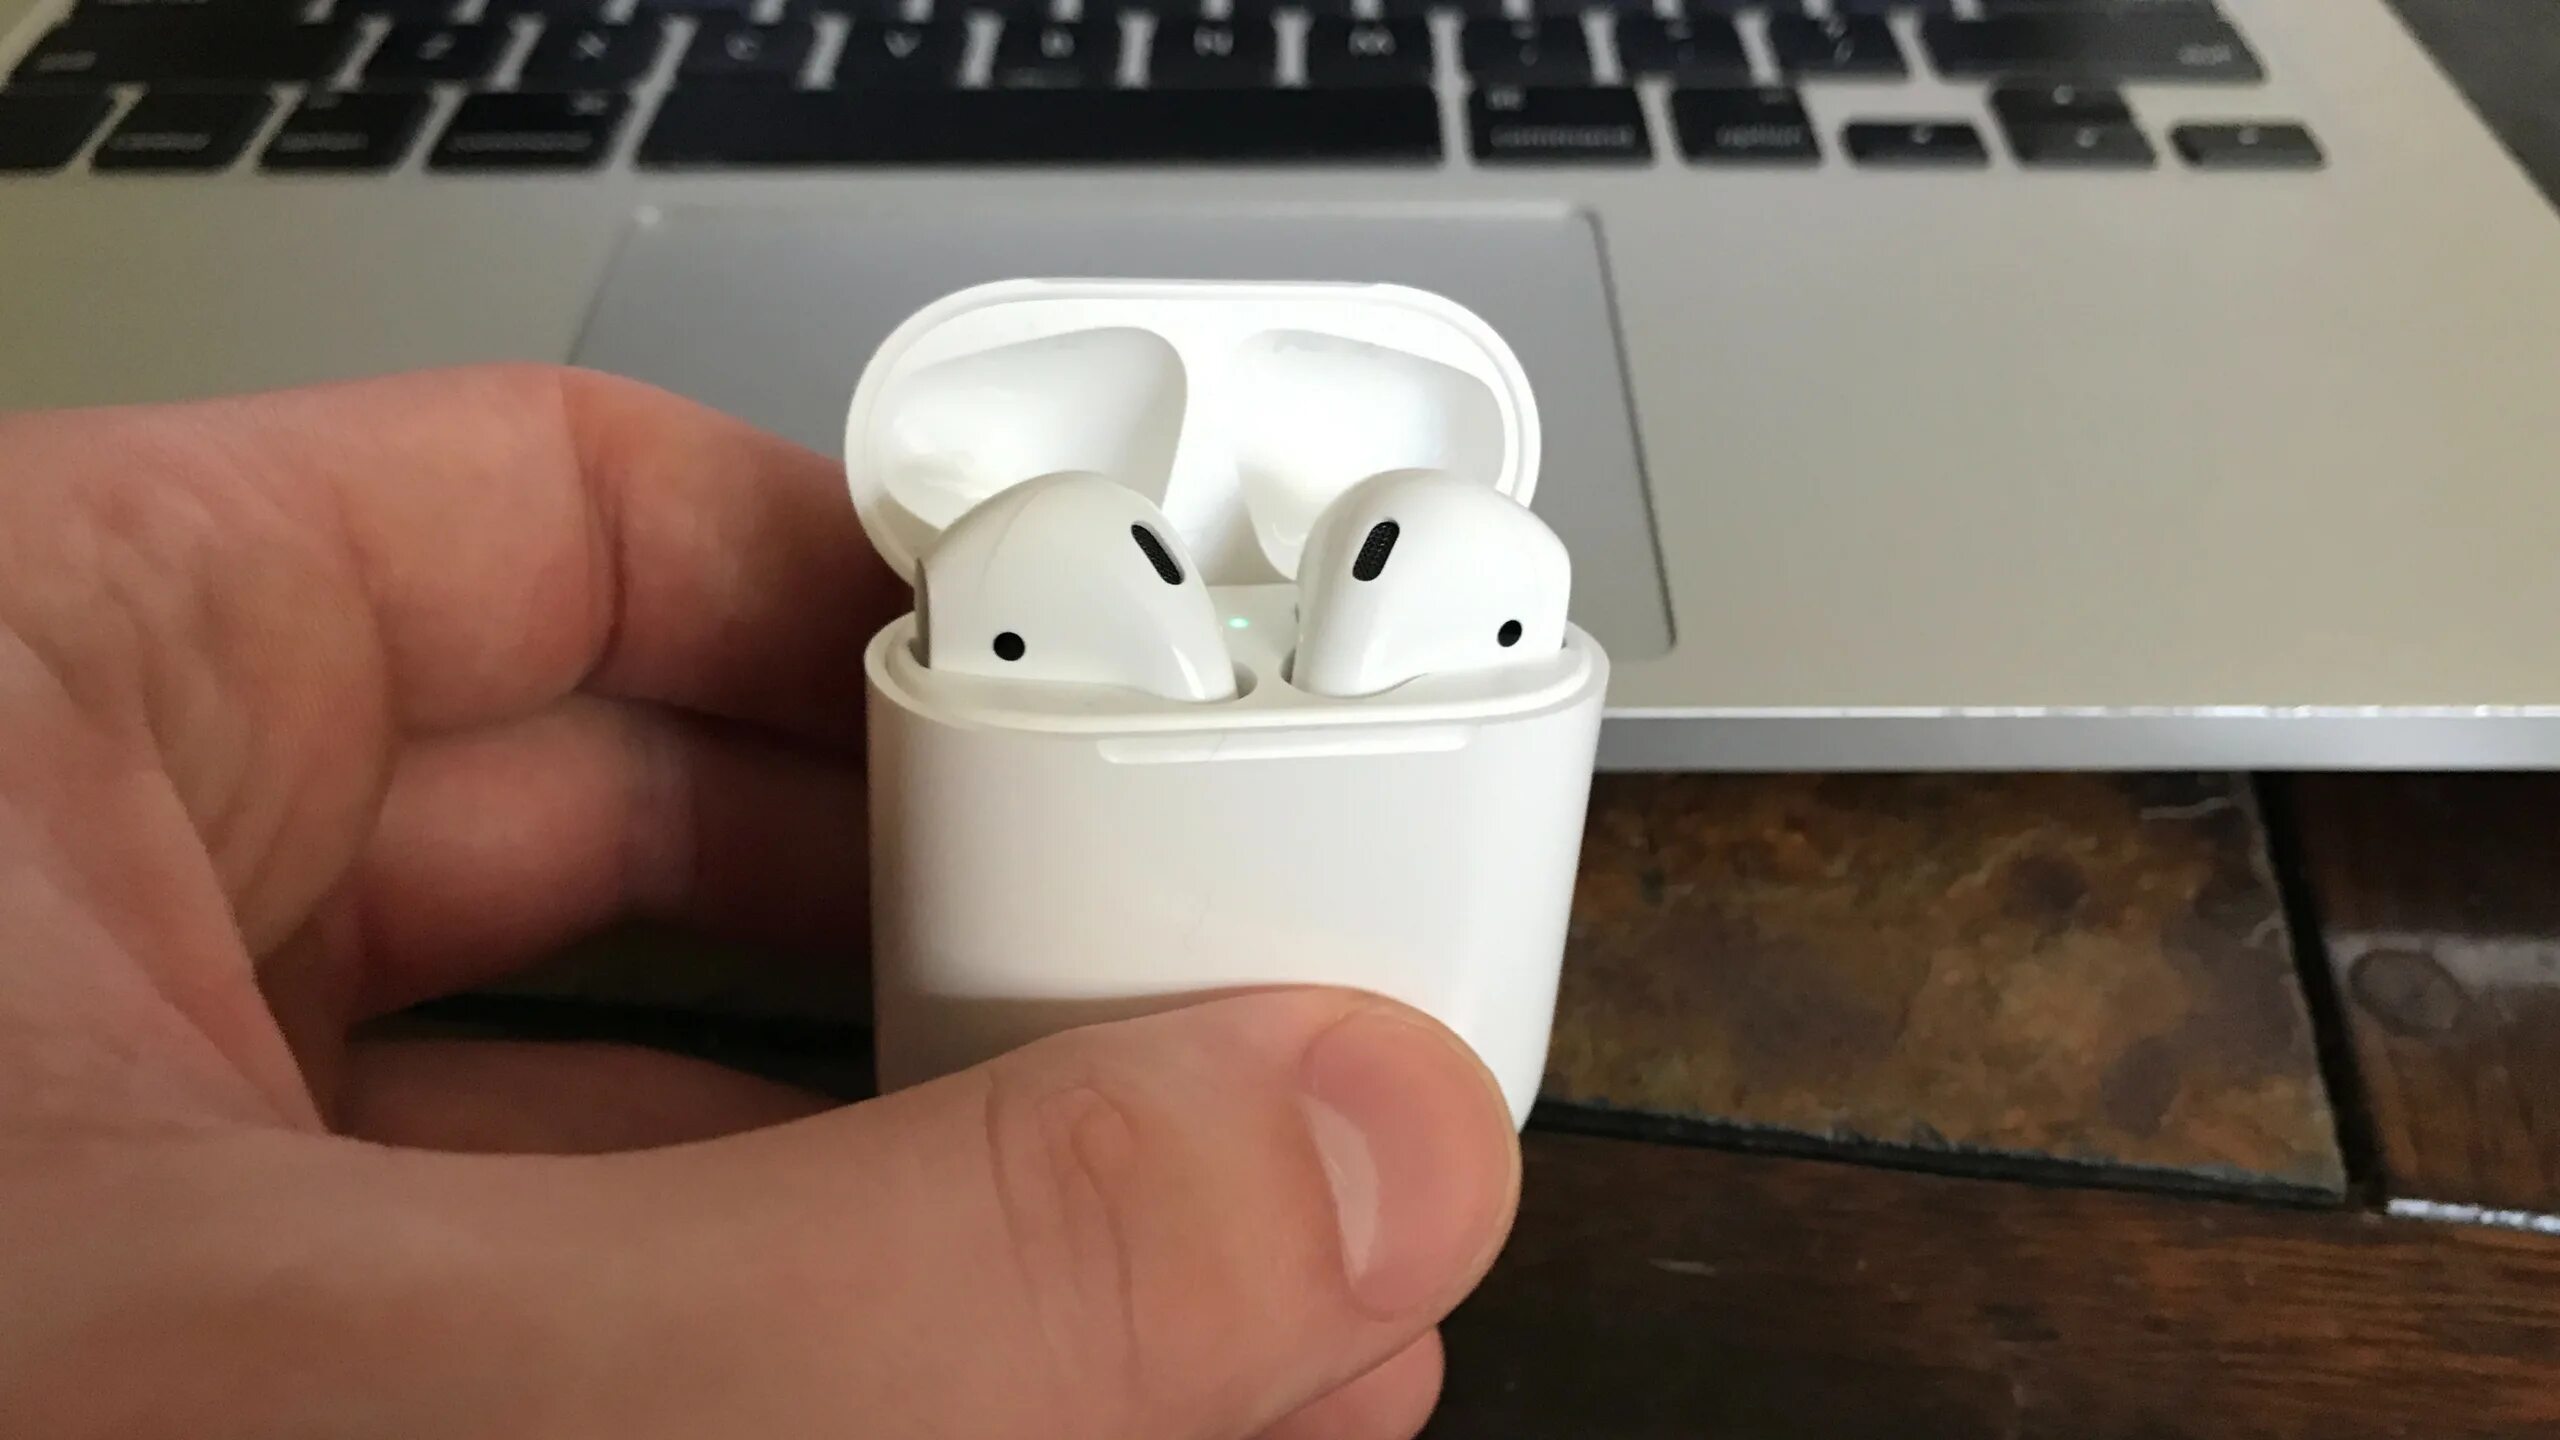 AIRPODS 2 Premium. Air pods Pro 2. AIRPODS nb0730. AIRPODS Pro 2 Premium. Airpods pro к ноутбуку